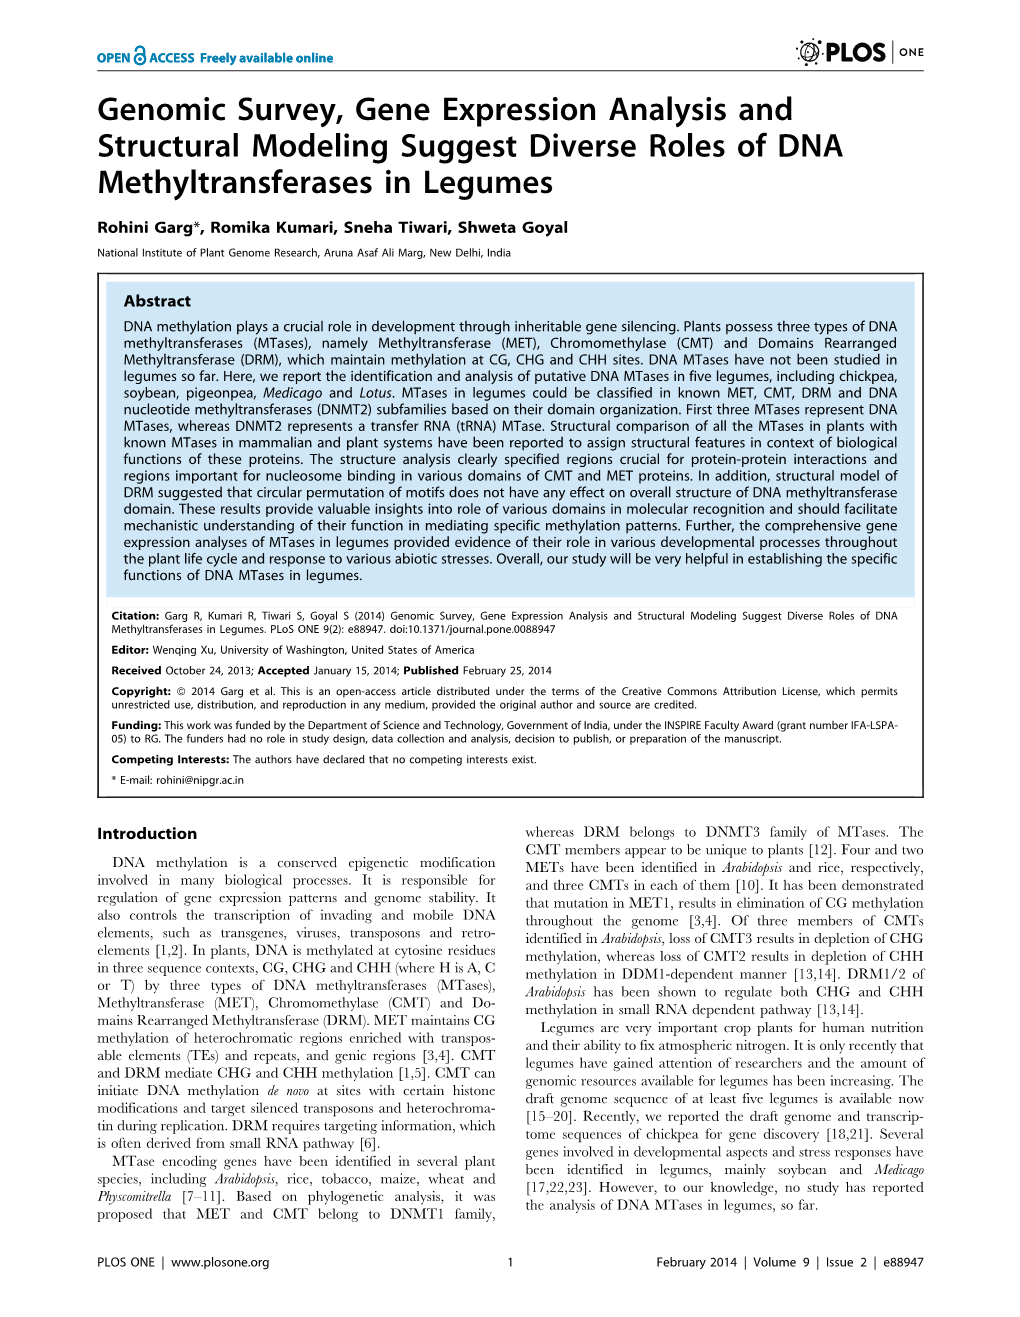 Genomic Survey, Gene Expression Analysis and Structural Modeling Suggest Diverse Roles of DNA Methyltransferases in Legumes